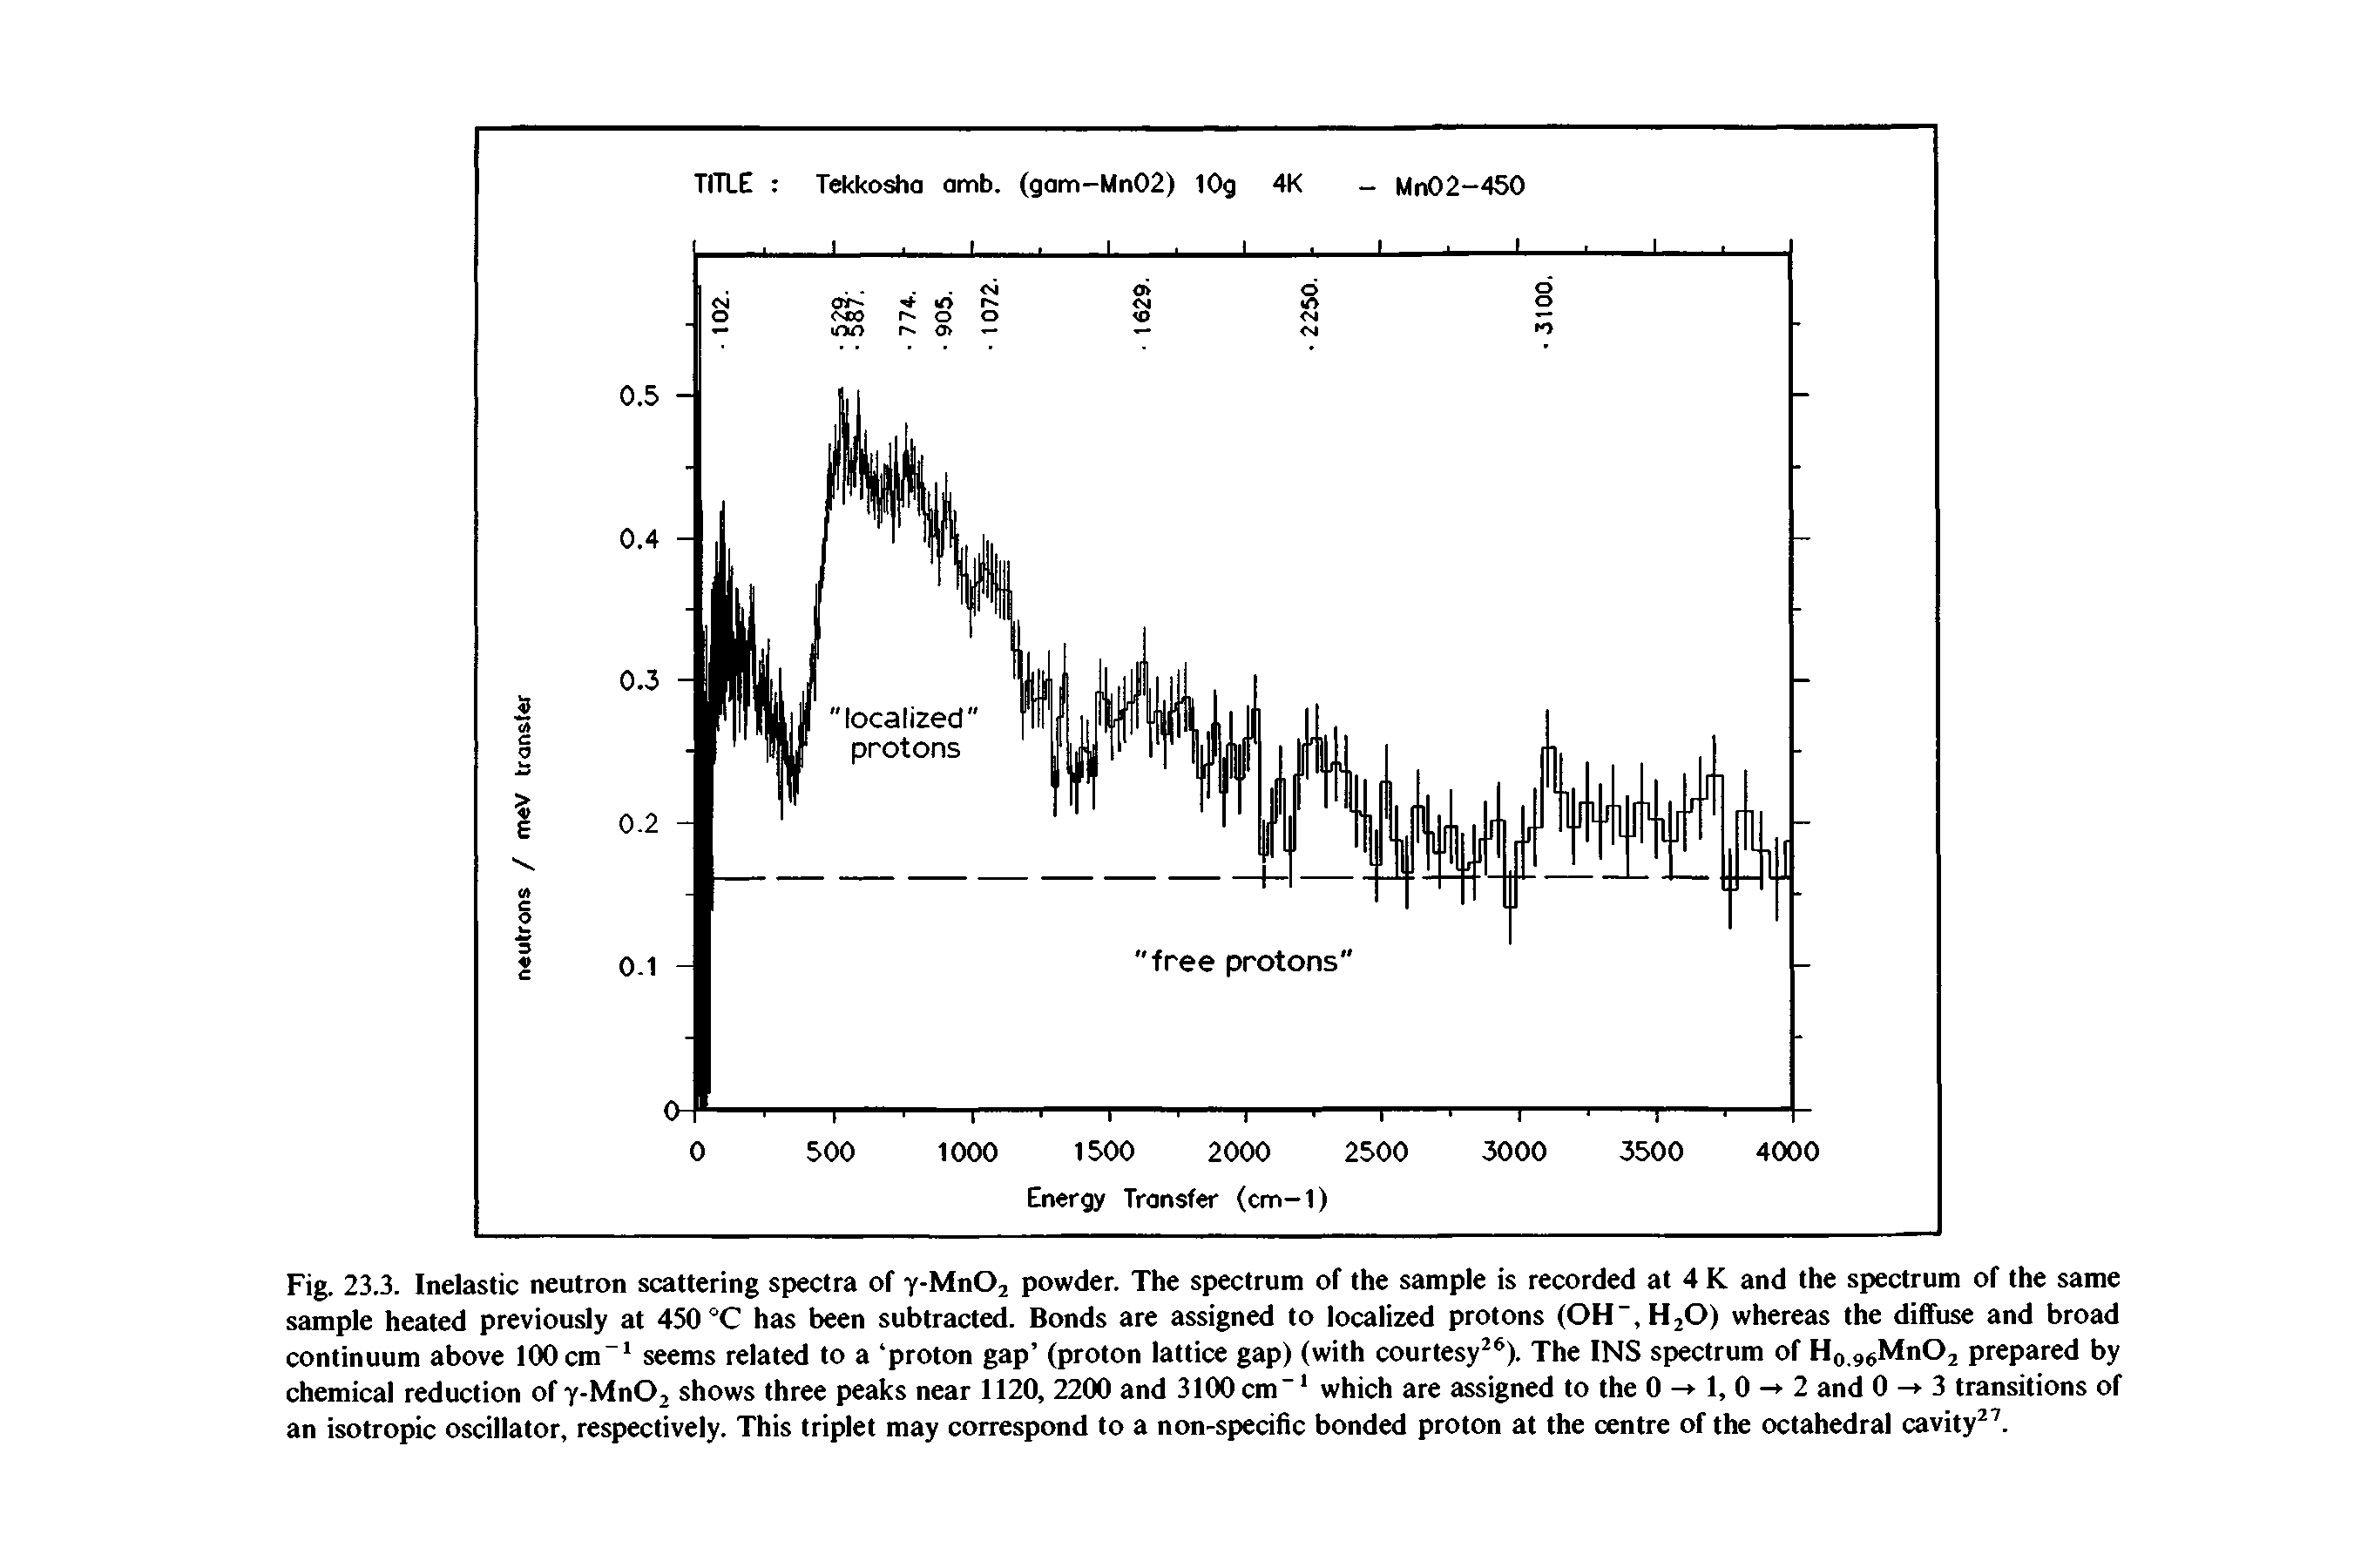 Fig. 23.3. Inelastic neutron scattering spectra of y-MnOj powder. The spectrum of the sample is recorded at 4 K and the spectrum of the same sample heated previously at 450 "C has been subtracted. Bonds are assigned to localized protons (OH .HjO) whereas the diffuse and broad continuum above 100cm seems related to a proton gap (proton lattice gap) (with courtesy ). The INS spectrum of Ho.ssMnOj prepared by chemical reduction of y-MnOj shows three peaks near 1120, 2200 and 3100 cm which are assigned to the 0 - 1, 0 - 2 and 0 — 3 transitions of an isotropic oscillator, respectively. This triplet may correspond to a non-specific bonded proton at the centre of the octahedral cavity .